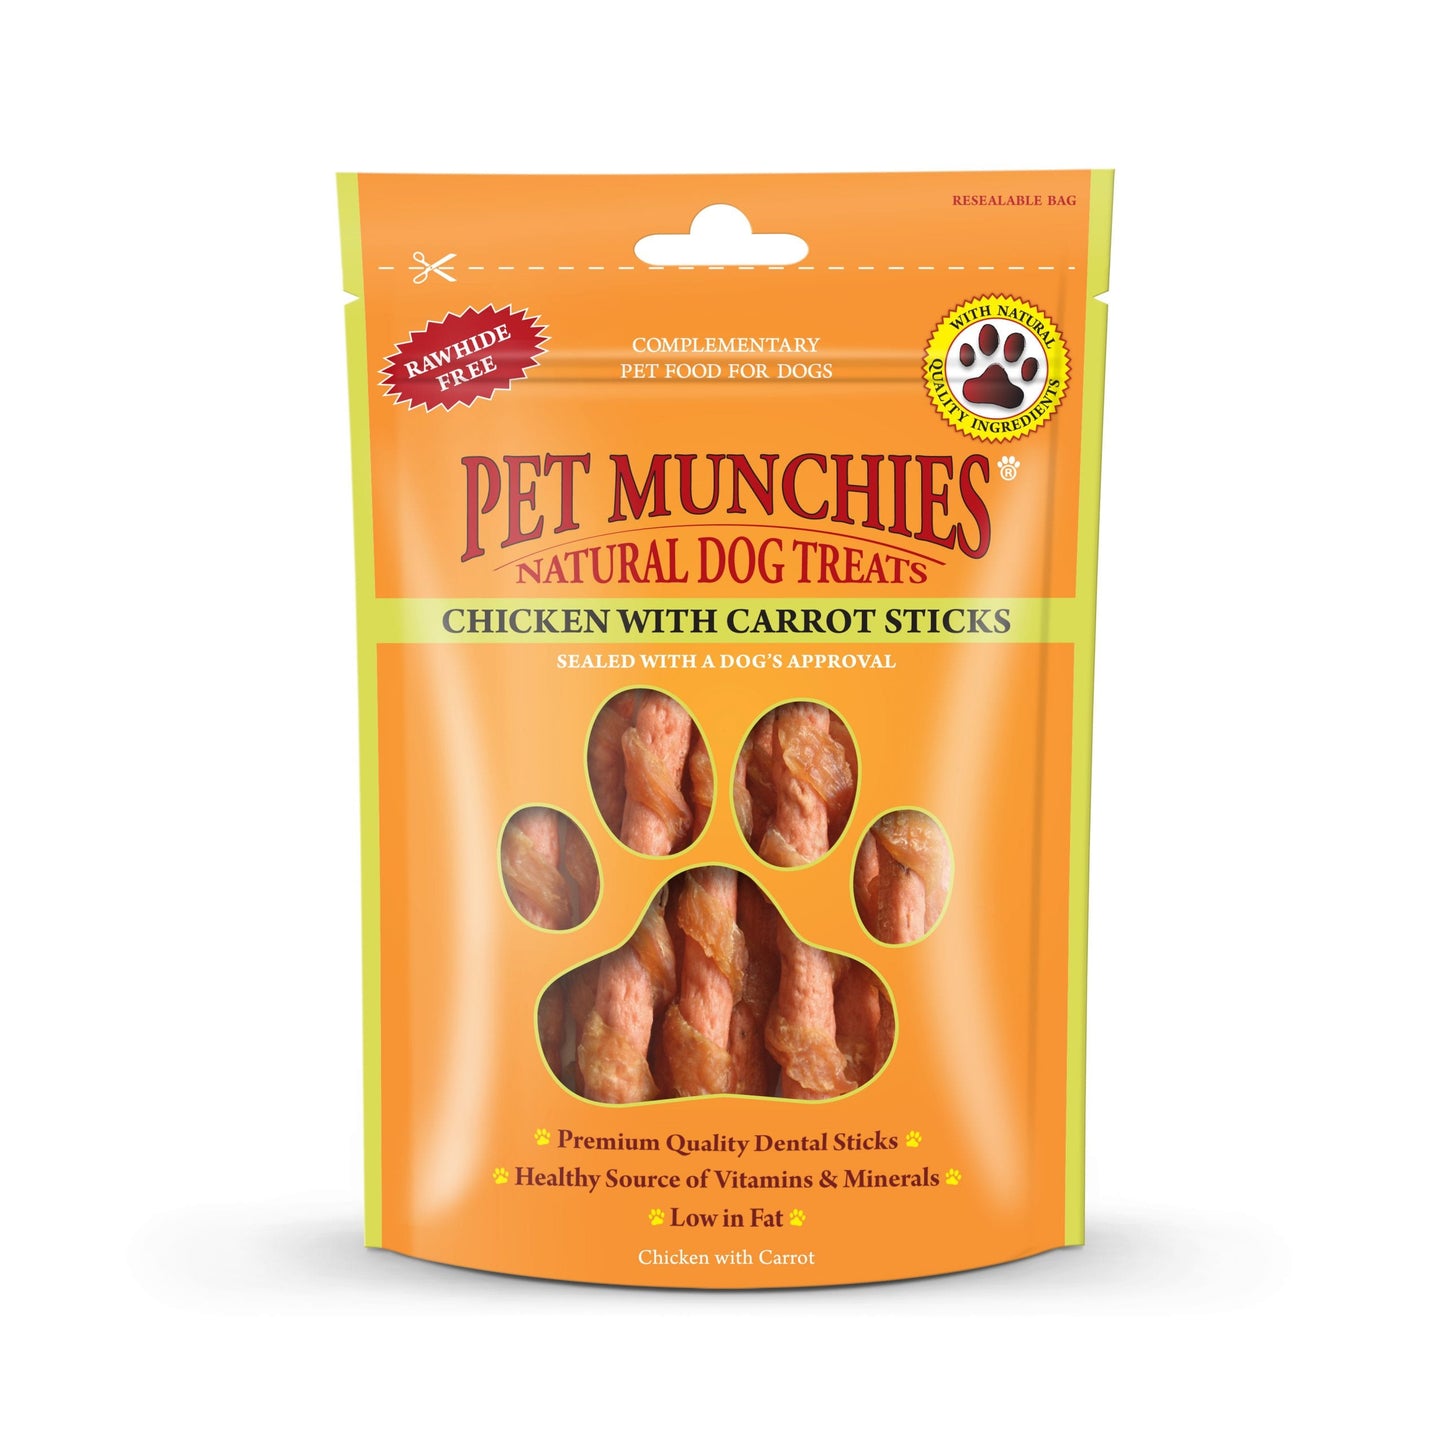 Pet Munchies Chicken with Carrot 80g